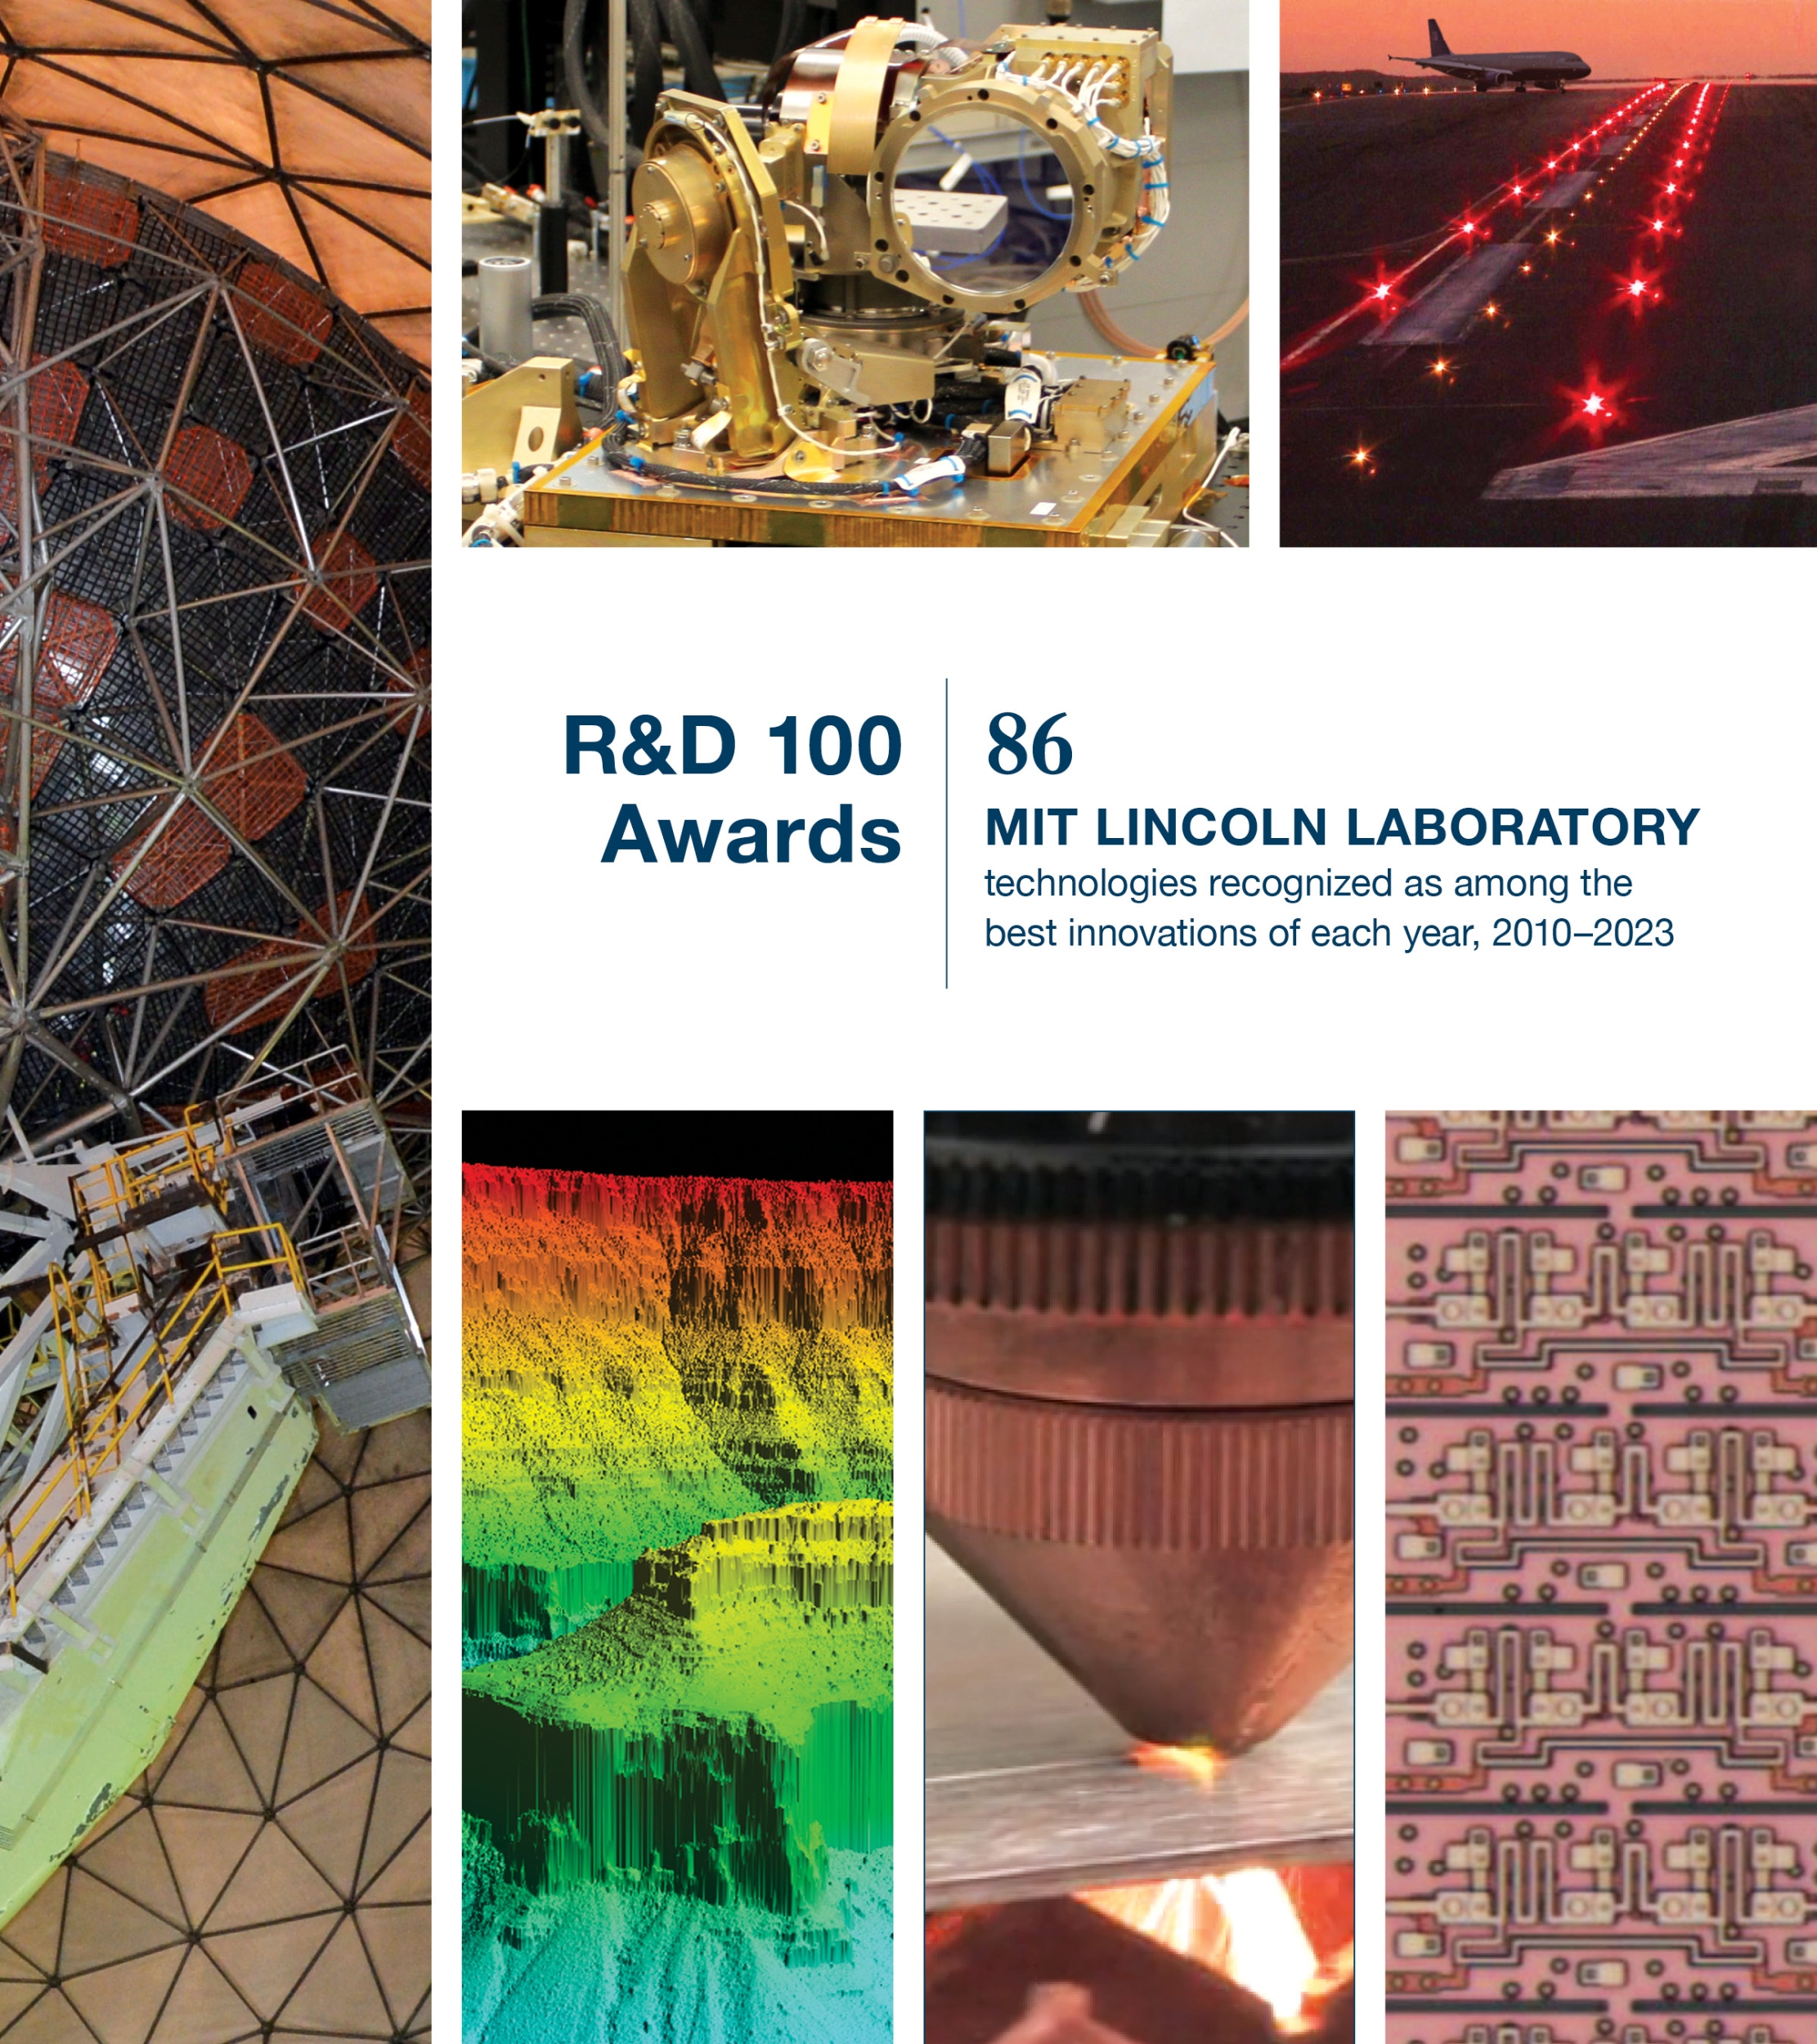 R&D 100 Booklet Cover